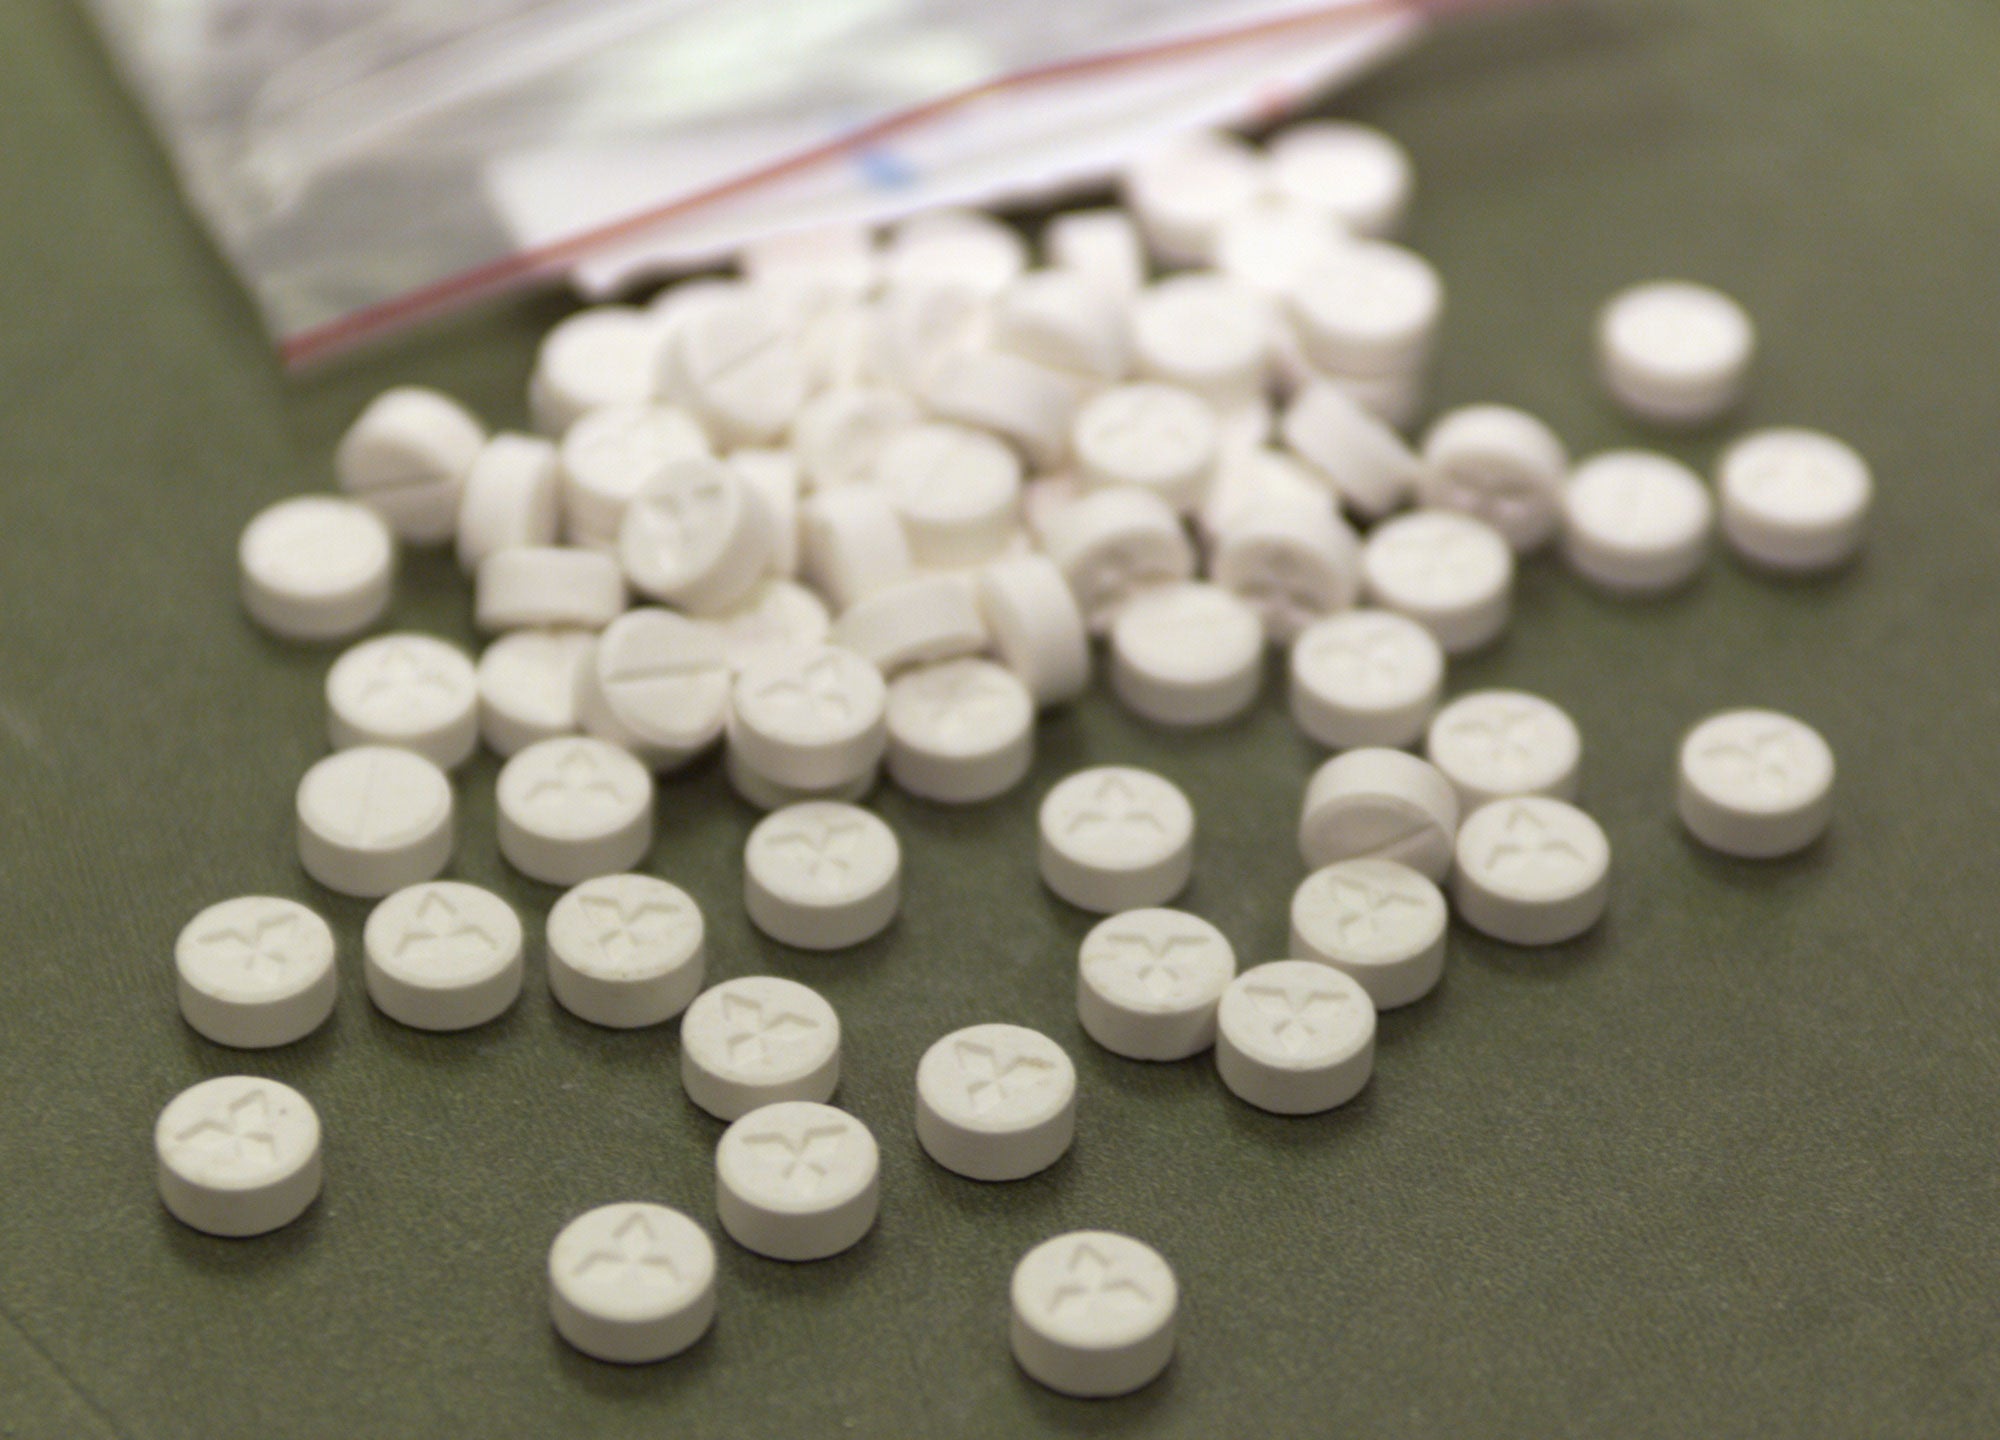 MDMA is now proven to help those with trauma image